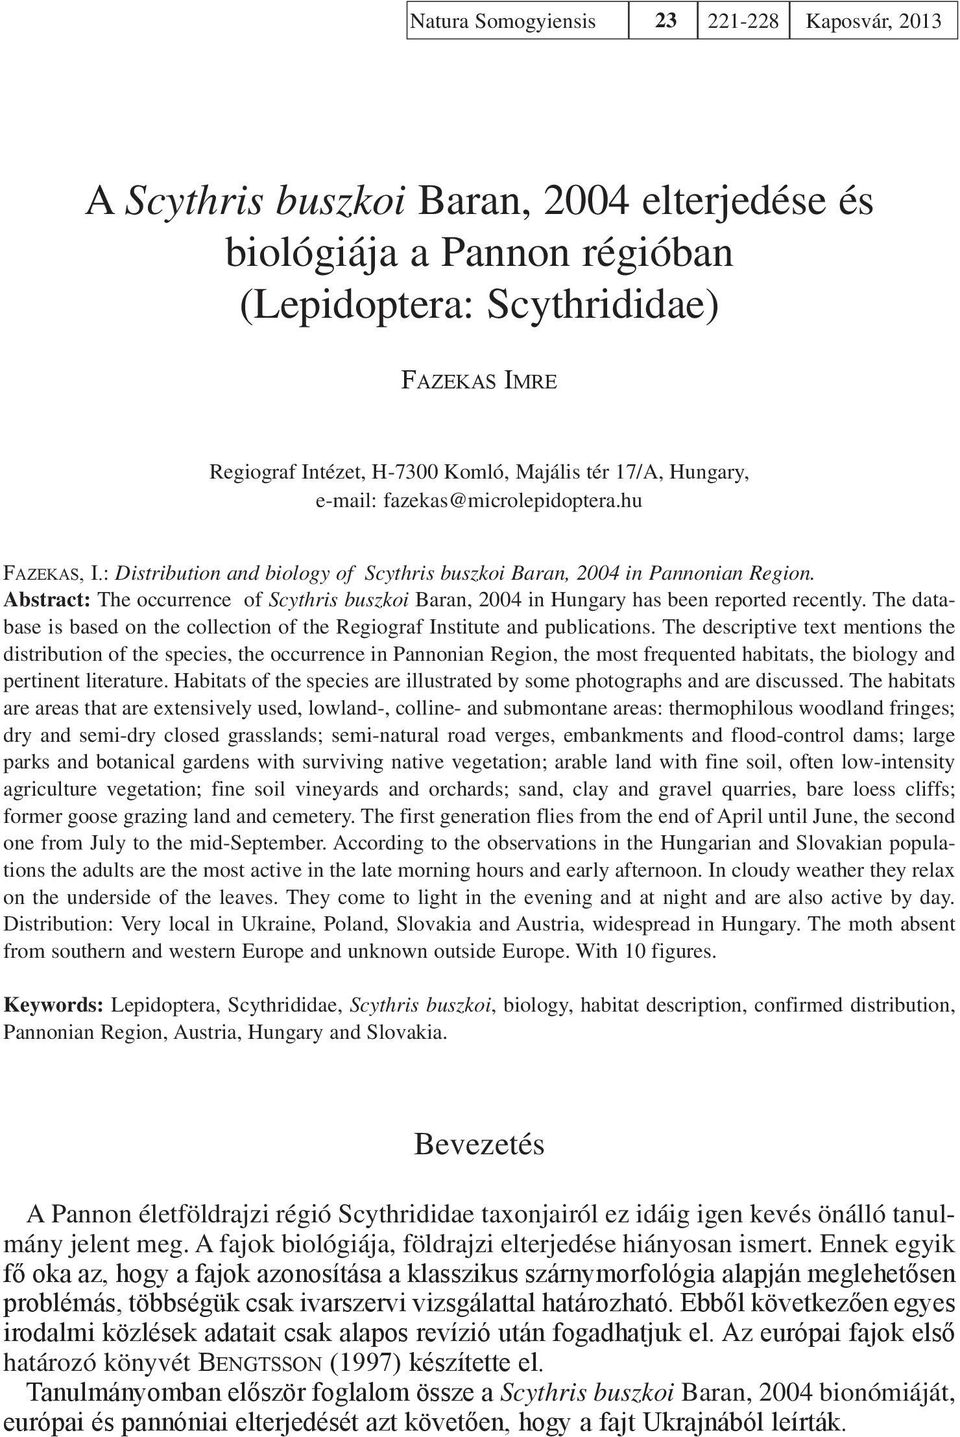 Abstract: The occurrence of Scythris buszkoi Baran, 2004 in Hungary has been reported recently. The database is based on the collection of the Regiograf Institute and publications.